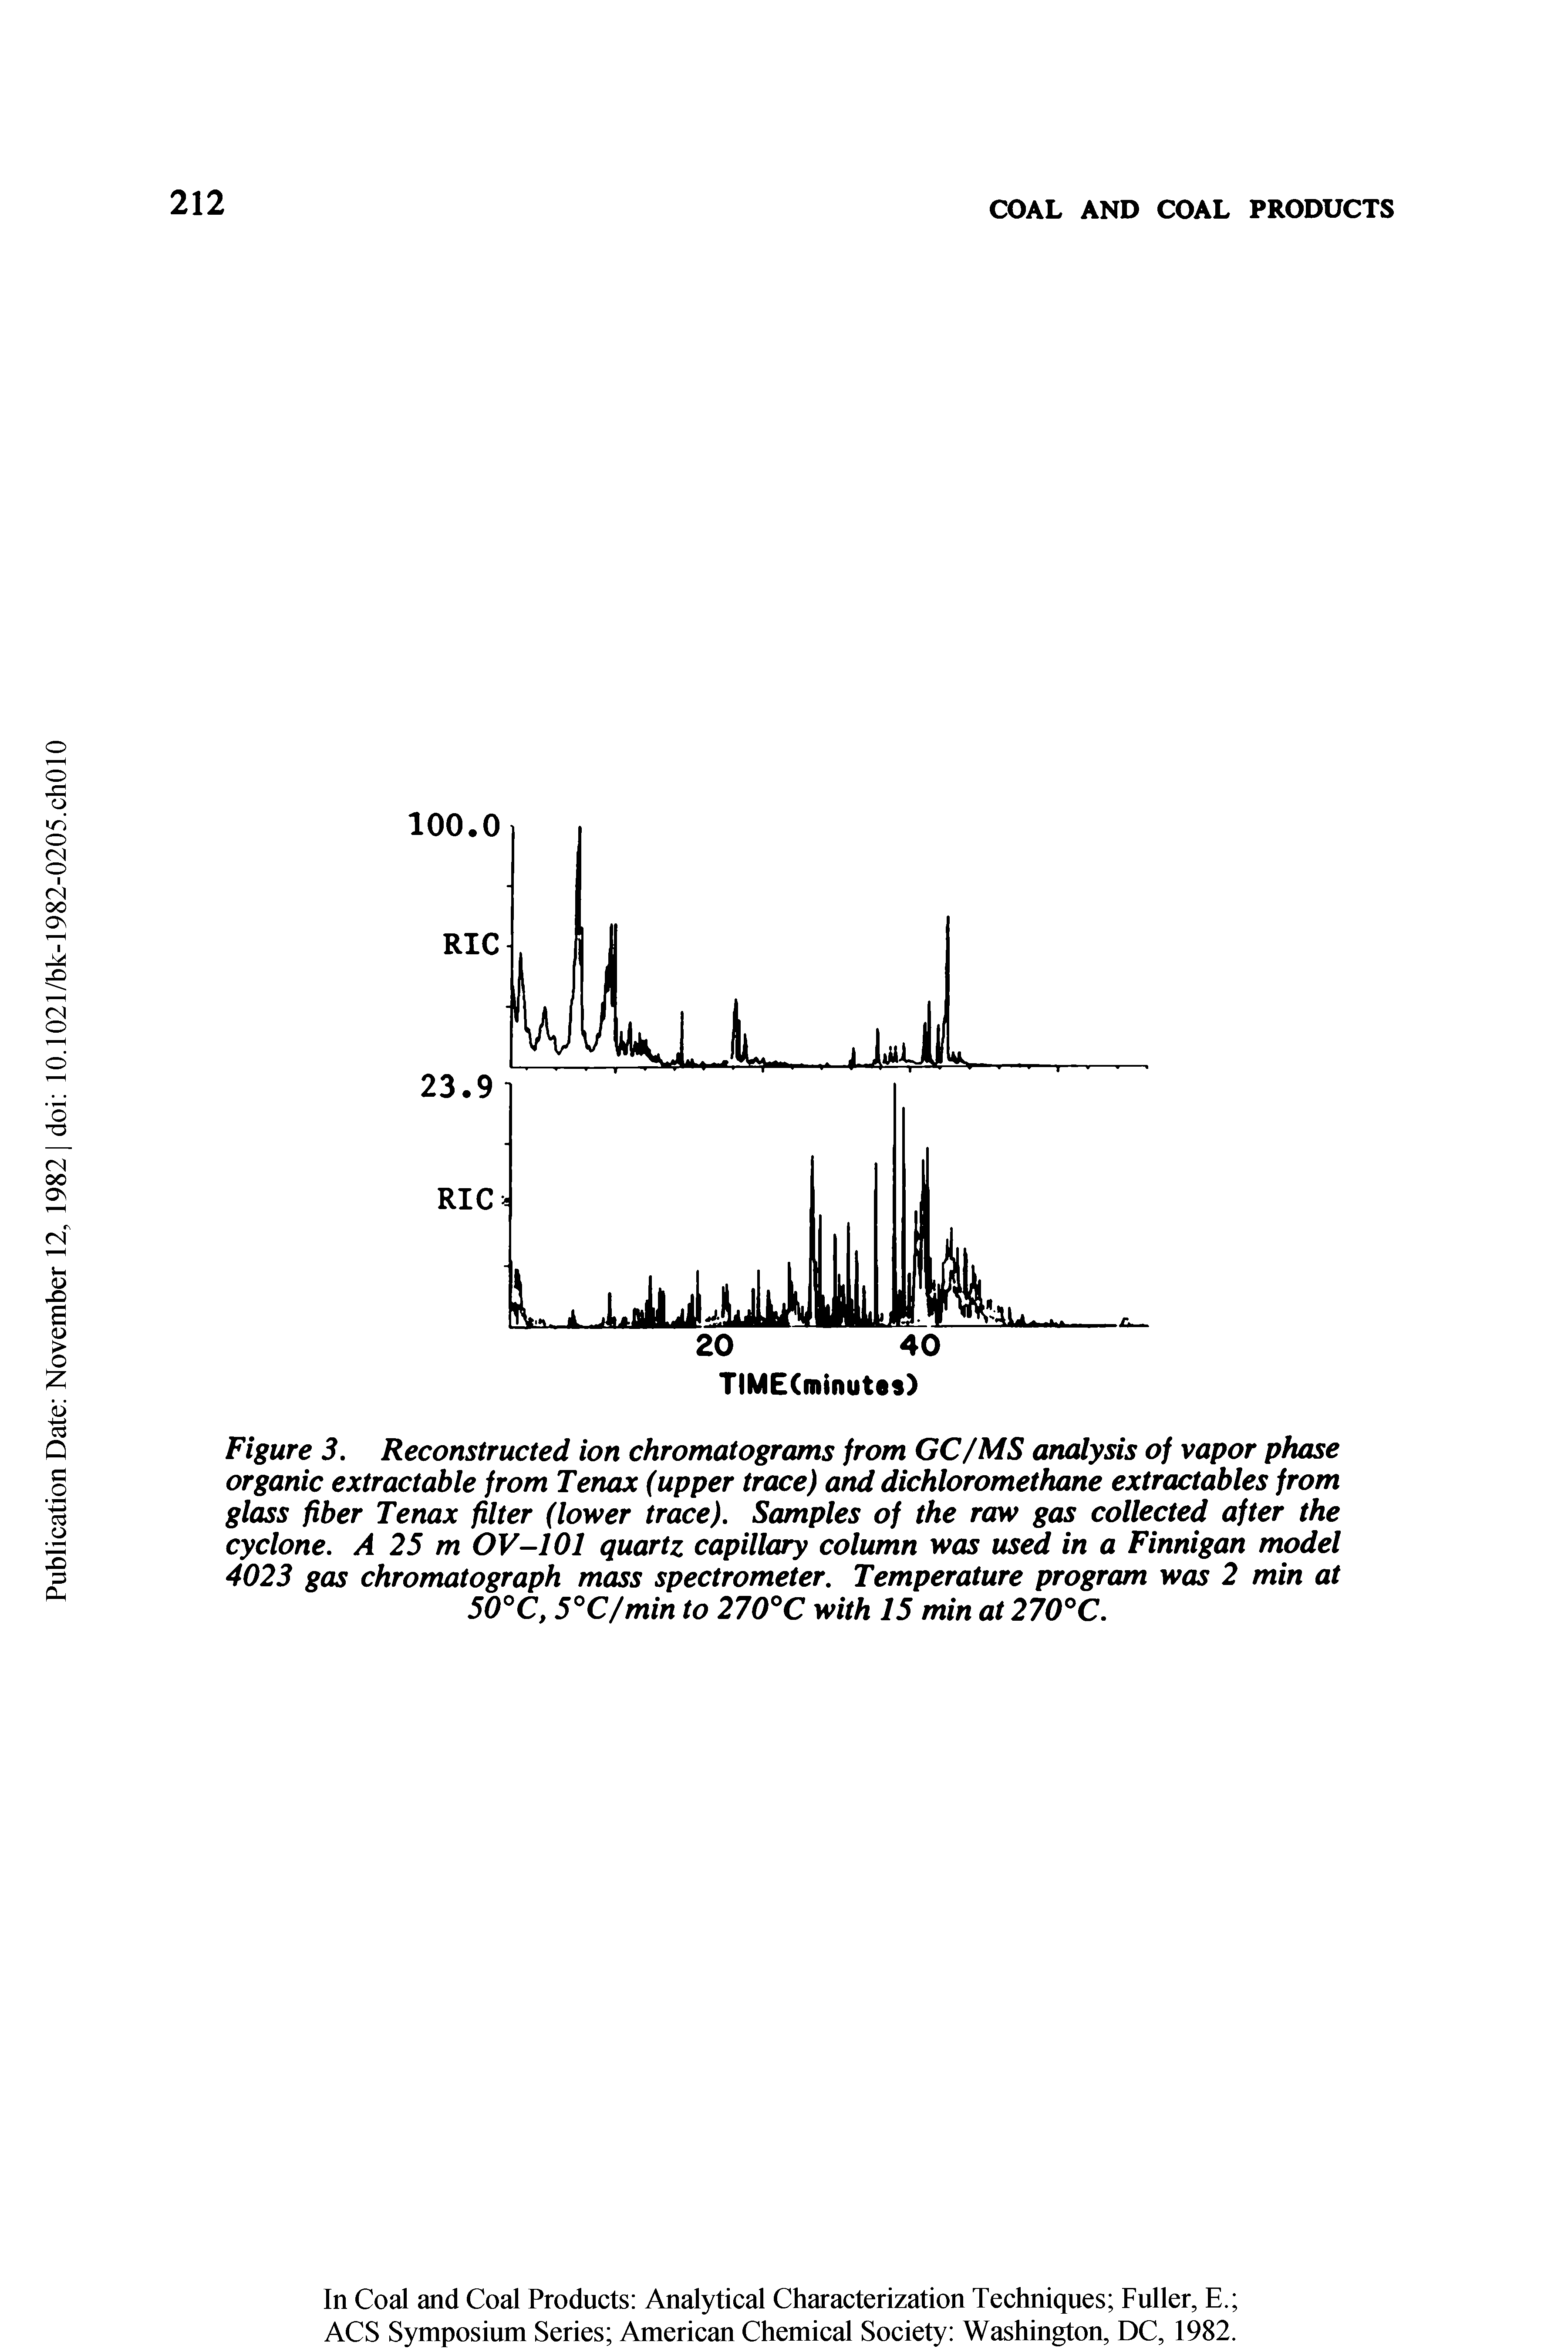 Figure 3. Reconstructed ion chromatograms from GC/MS analysis of vapor phase organic extractable from Tenax (upper trace) and dichloromethane extractables from glass fiber Tenax filter (lower trace). Samples of the raw gas collected after the cyclone. A 25 m OV-101 quartz capillary column was used in a Finnigan model 4023 gas chromatograph mass spectrometer. Temperature program was 2 min at 50°C, 5°C/min to 270°C with 15 min at 270 C.